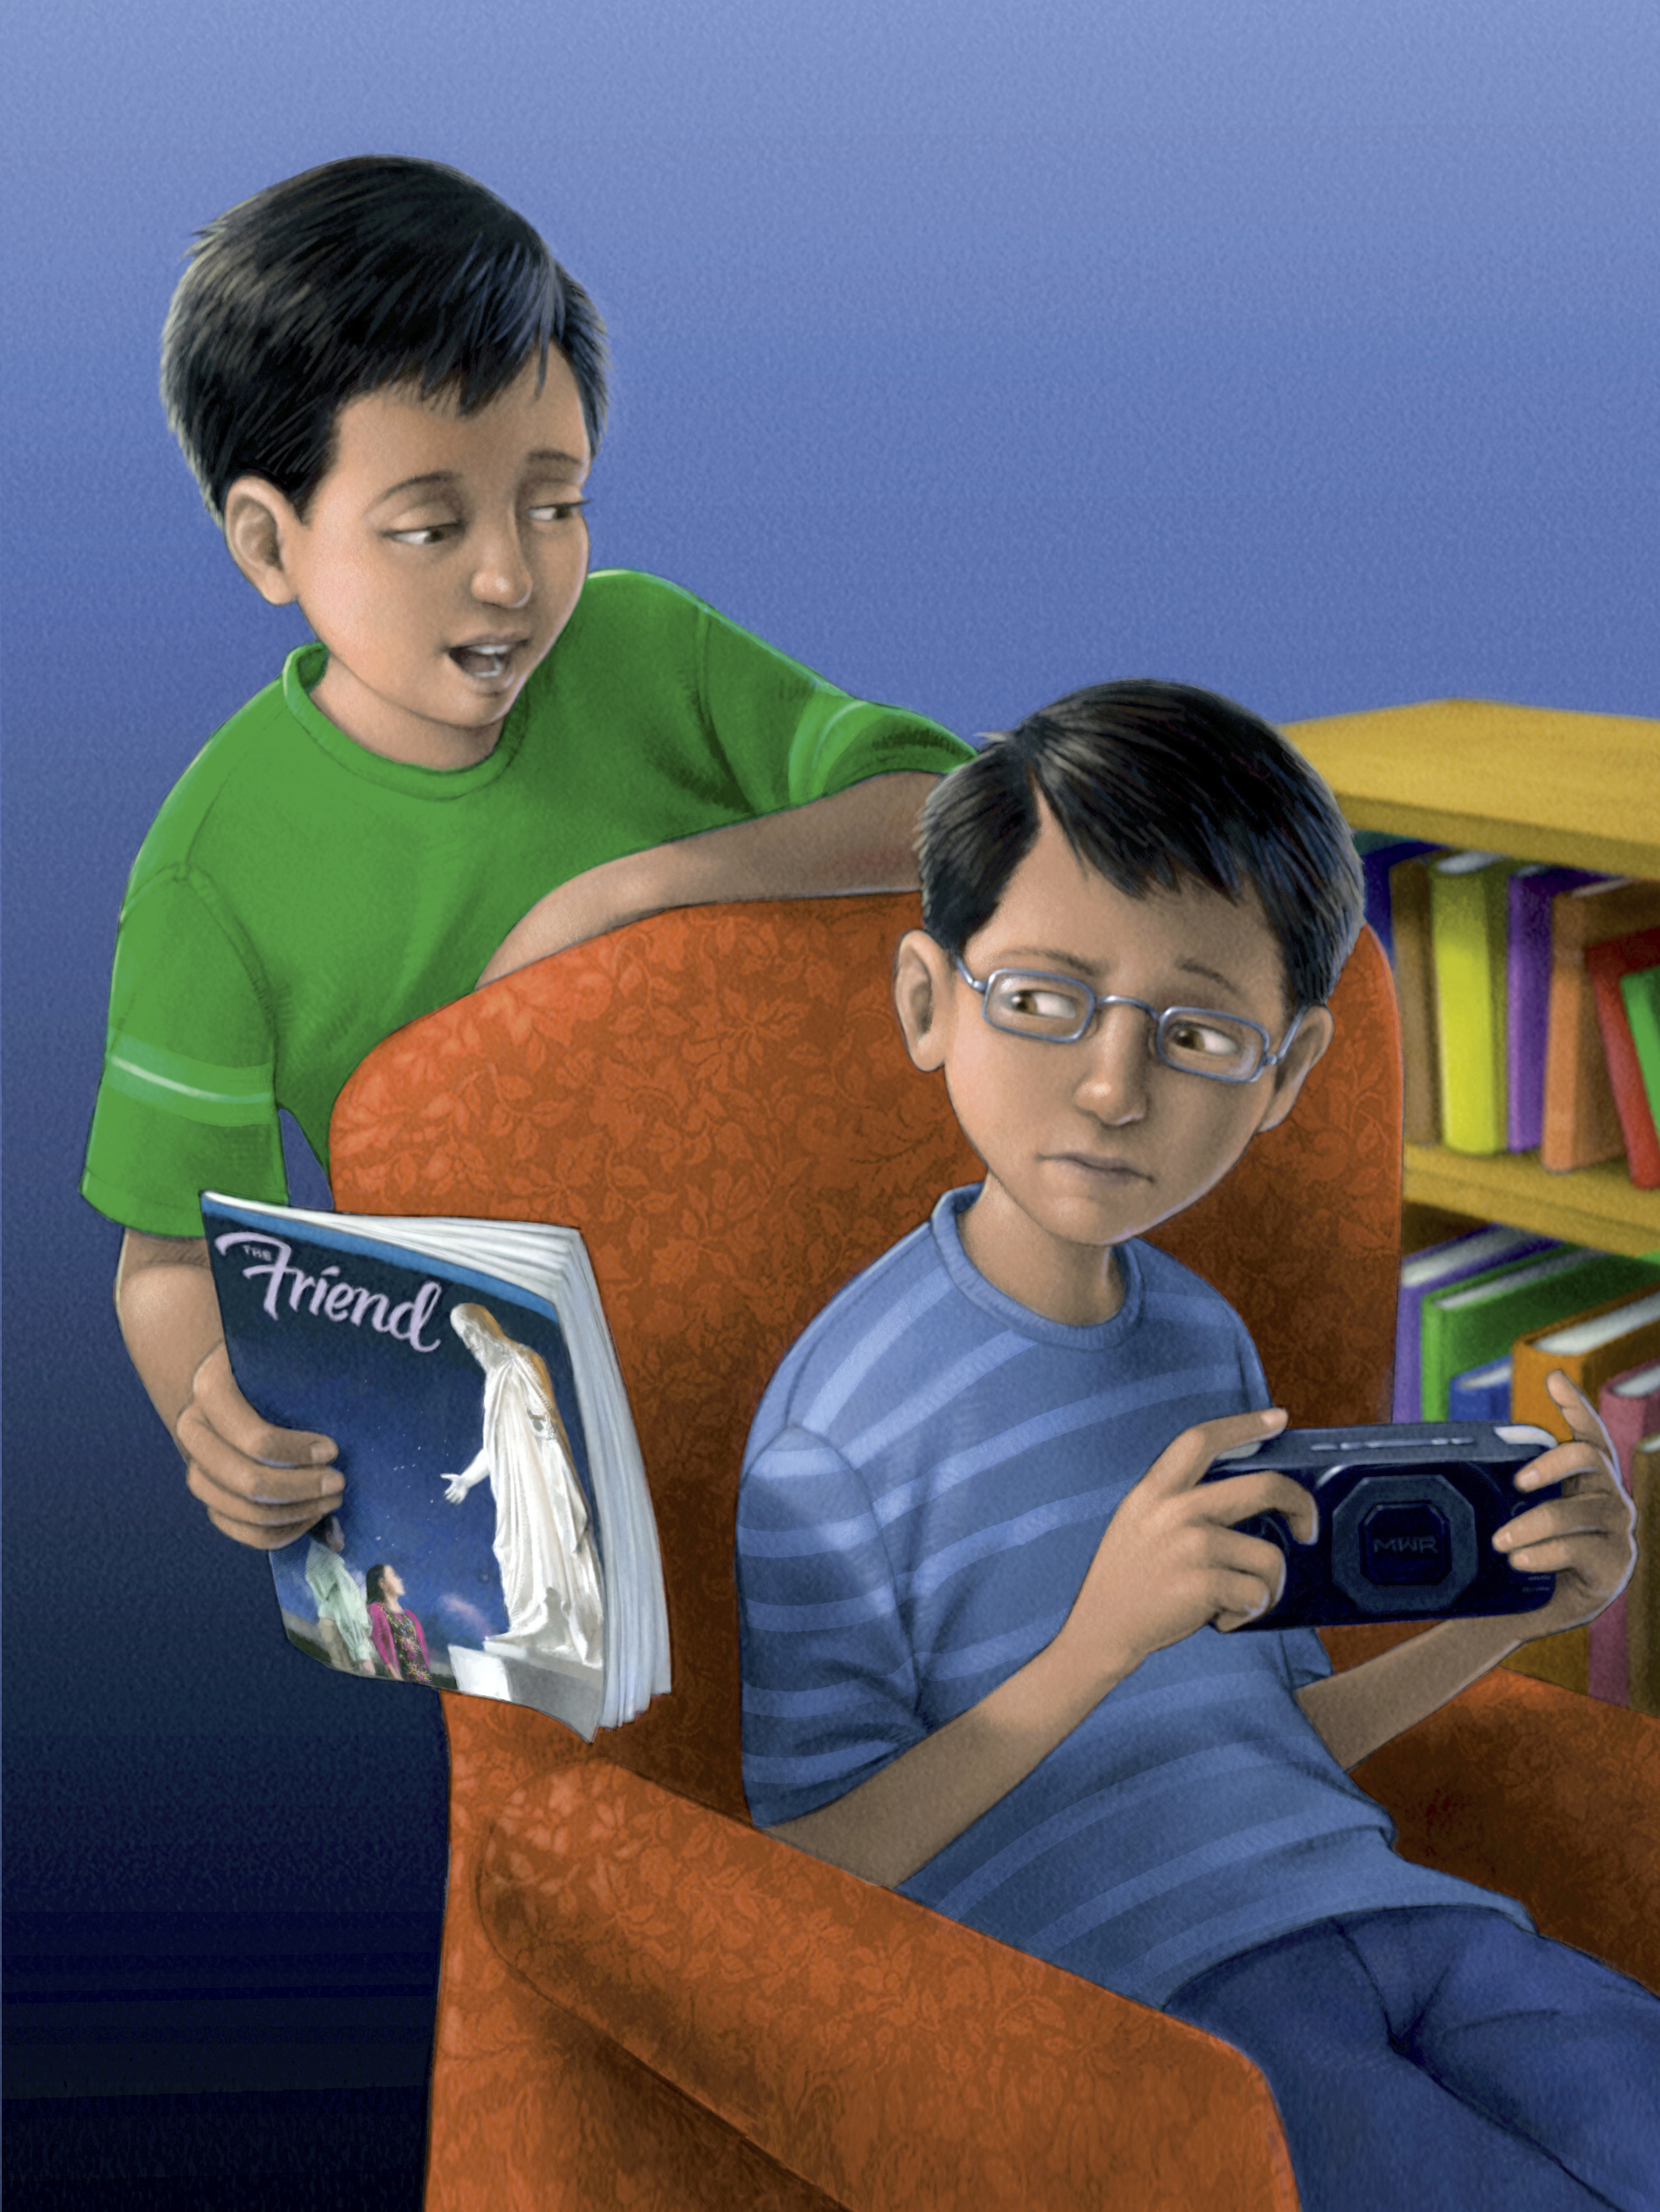 A boy tries to share a copy of the Friend magazine with his brother, who is sitting on a chair.